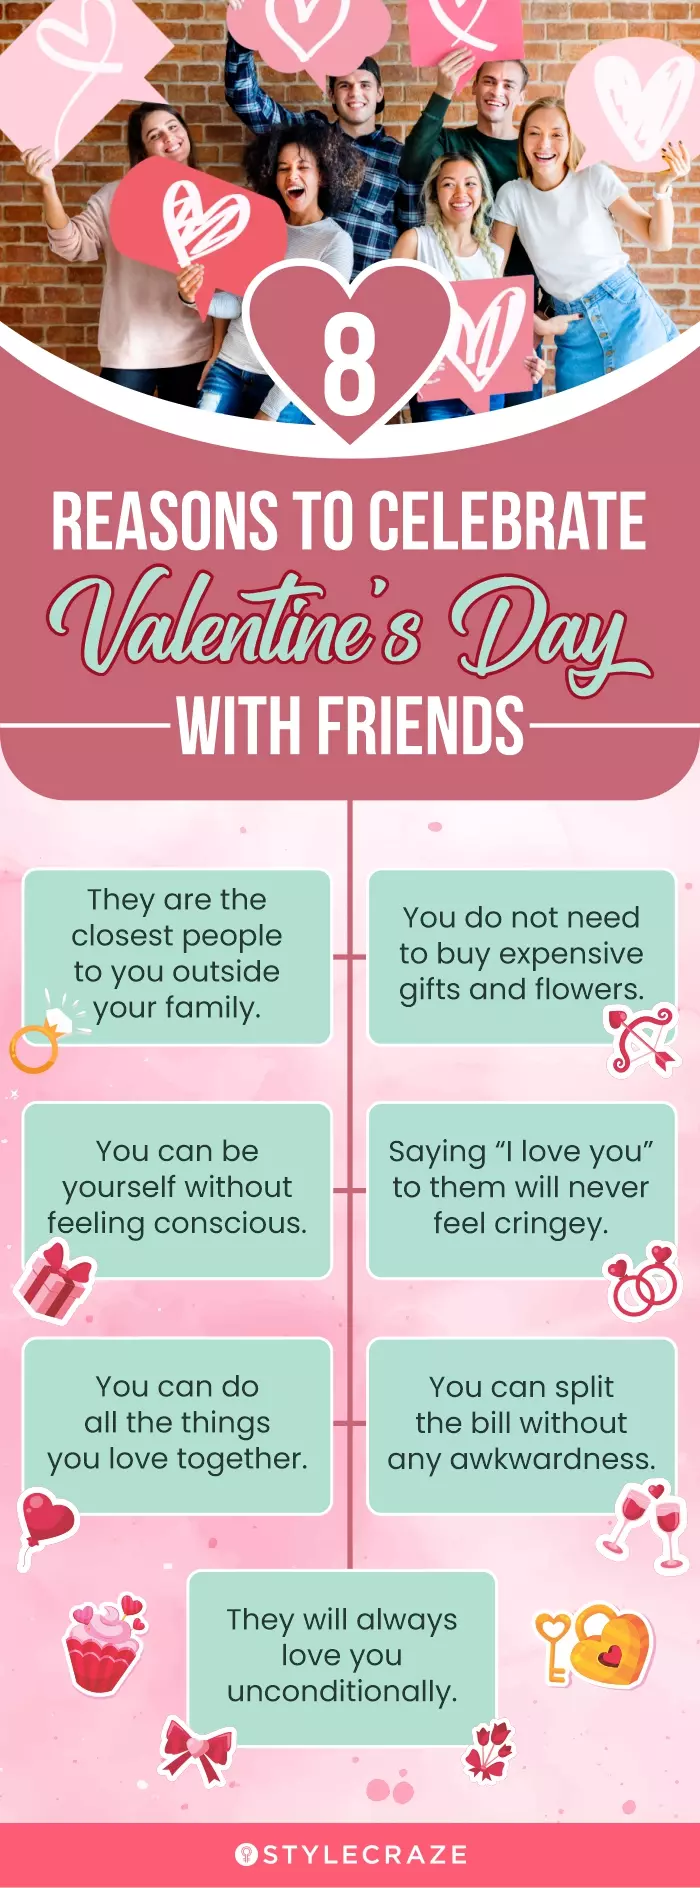 8 reasons to celebrate valentine's day with friends (infographic)